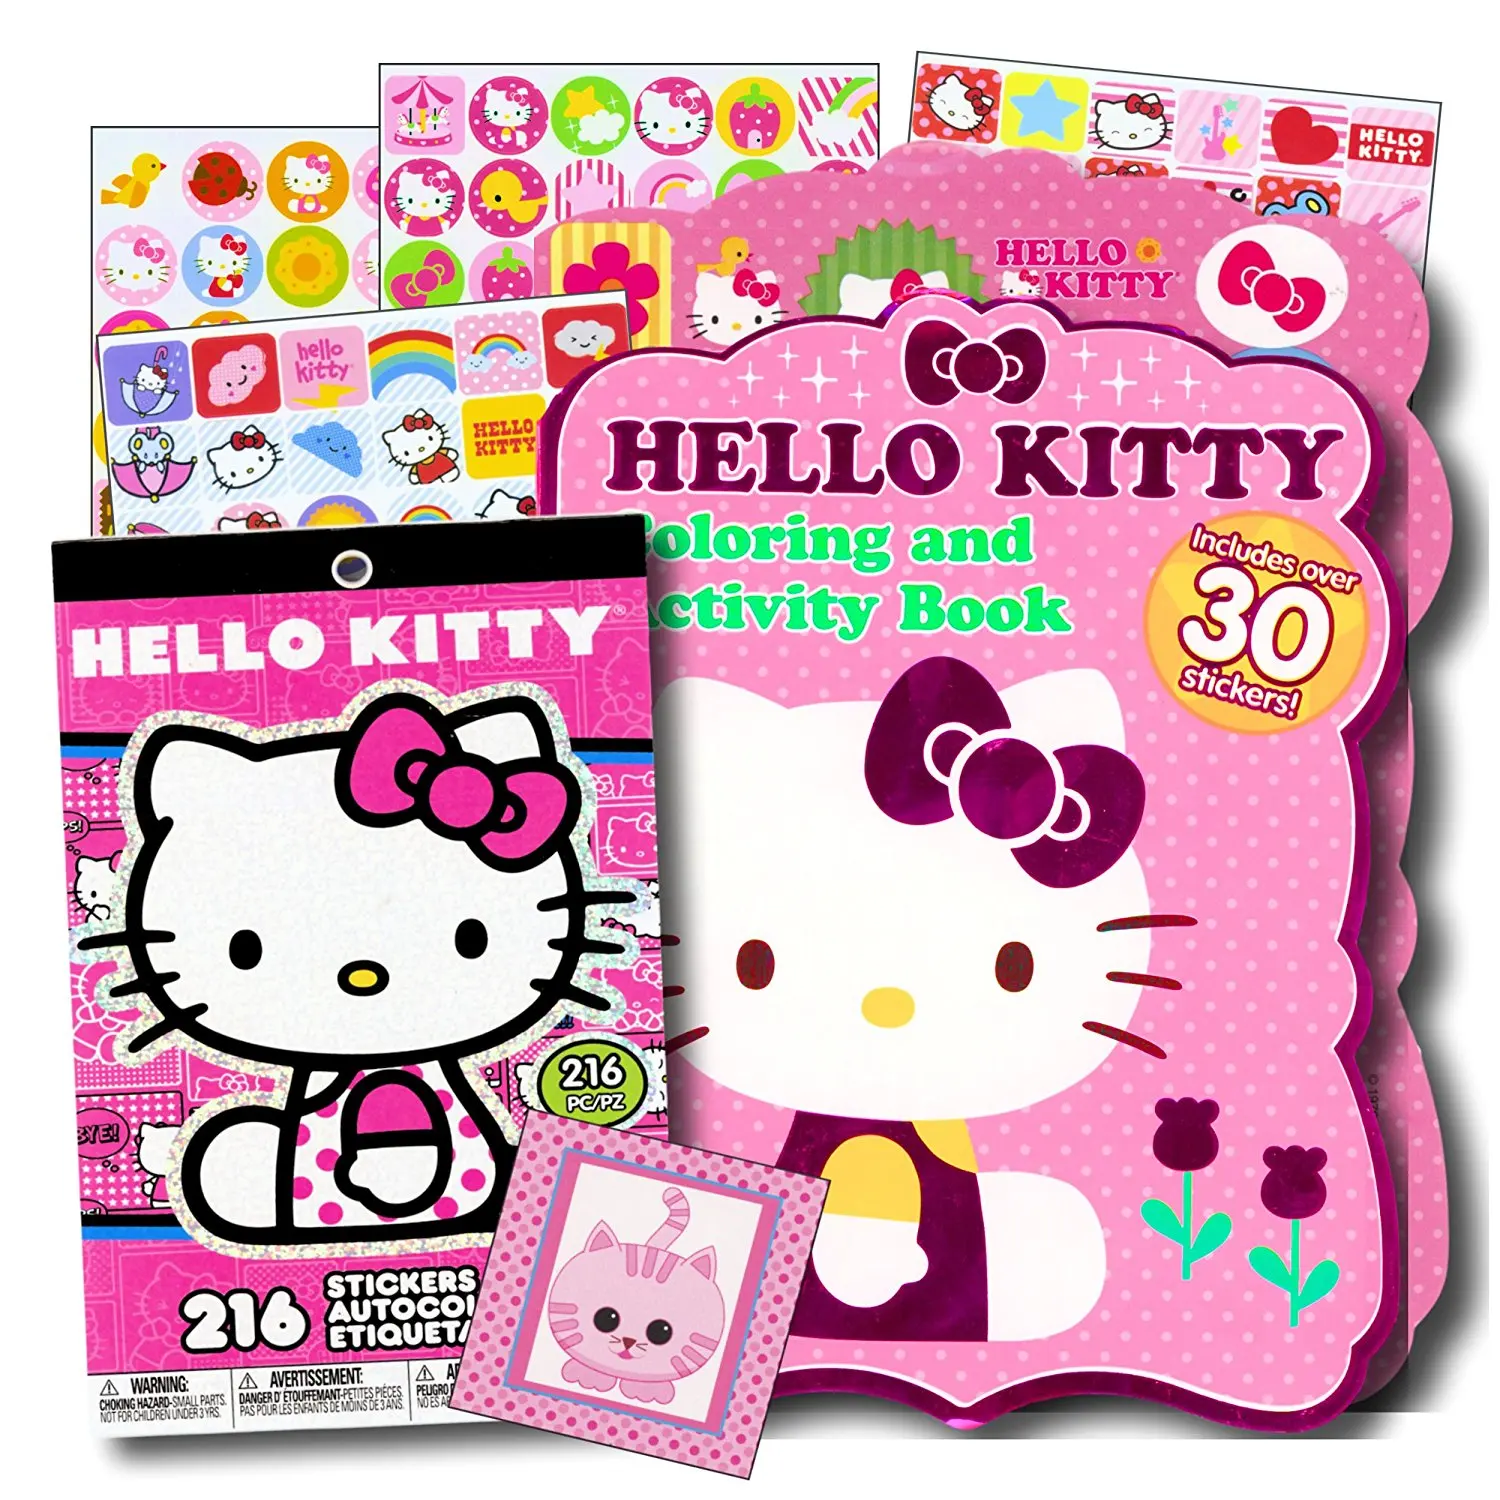 Buy Hello Kitty Coloring Book and Stickers Super Set~ Shaped Foil Cover